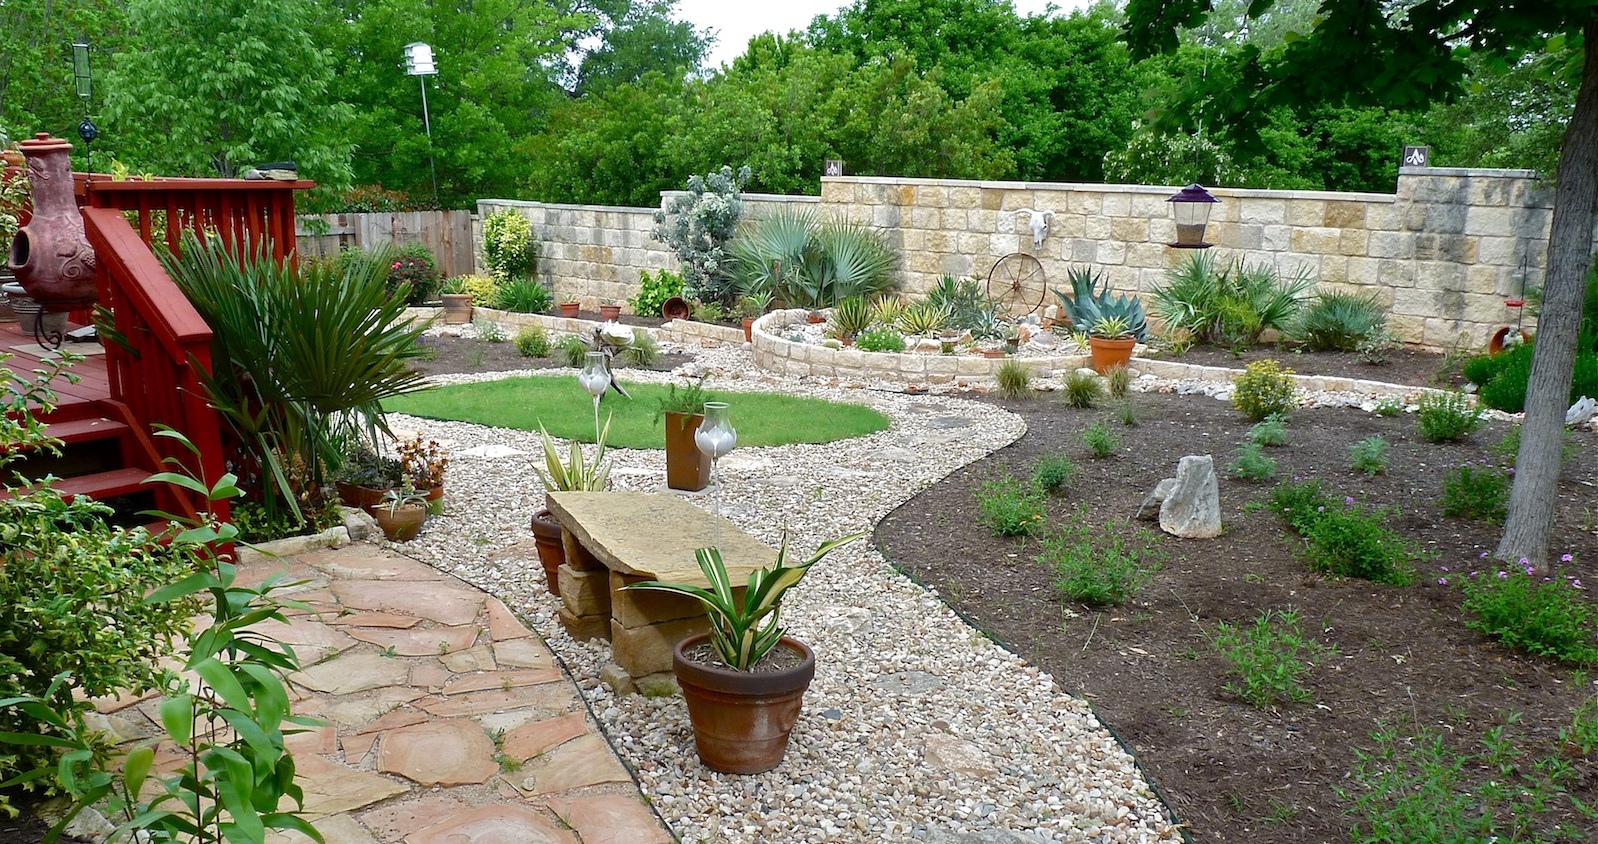 REFLECTIONS ON A XERISCAPE | Central Texas Gardening